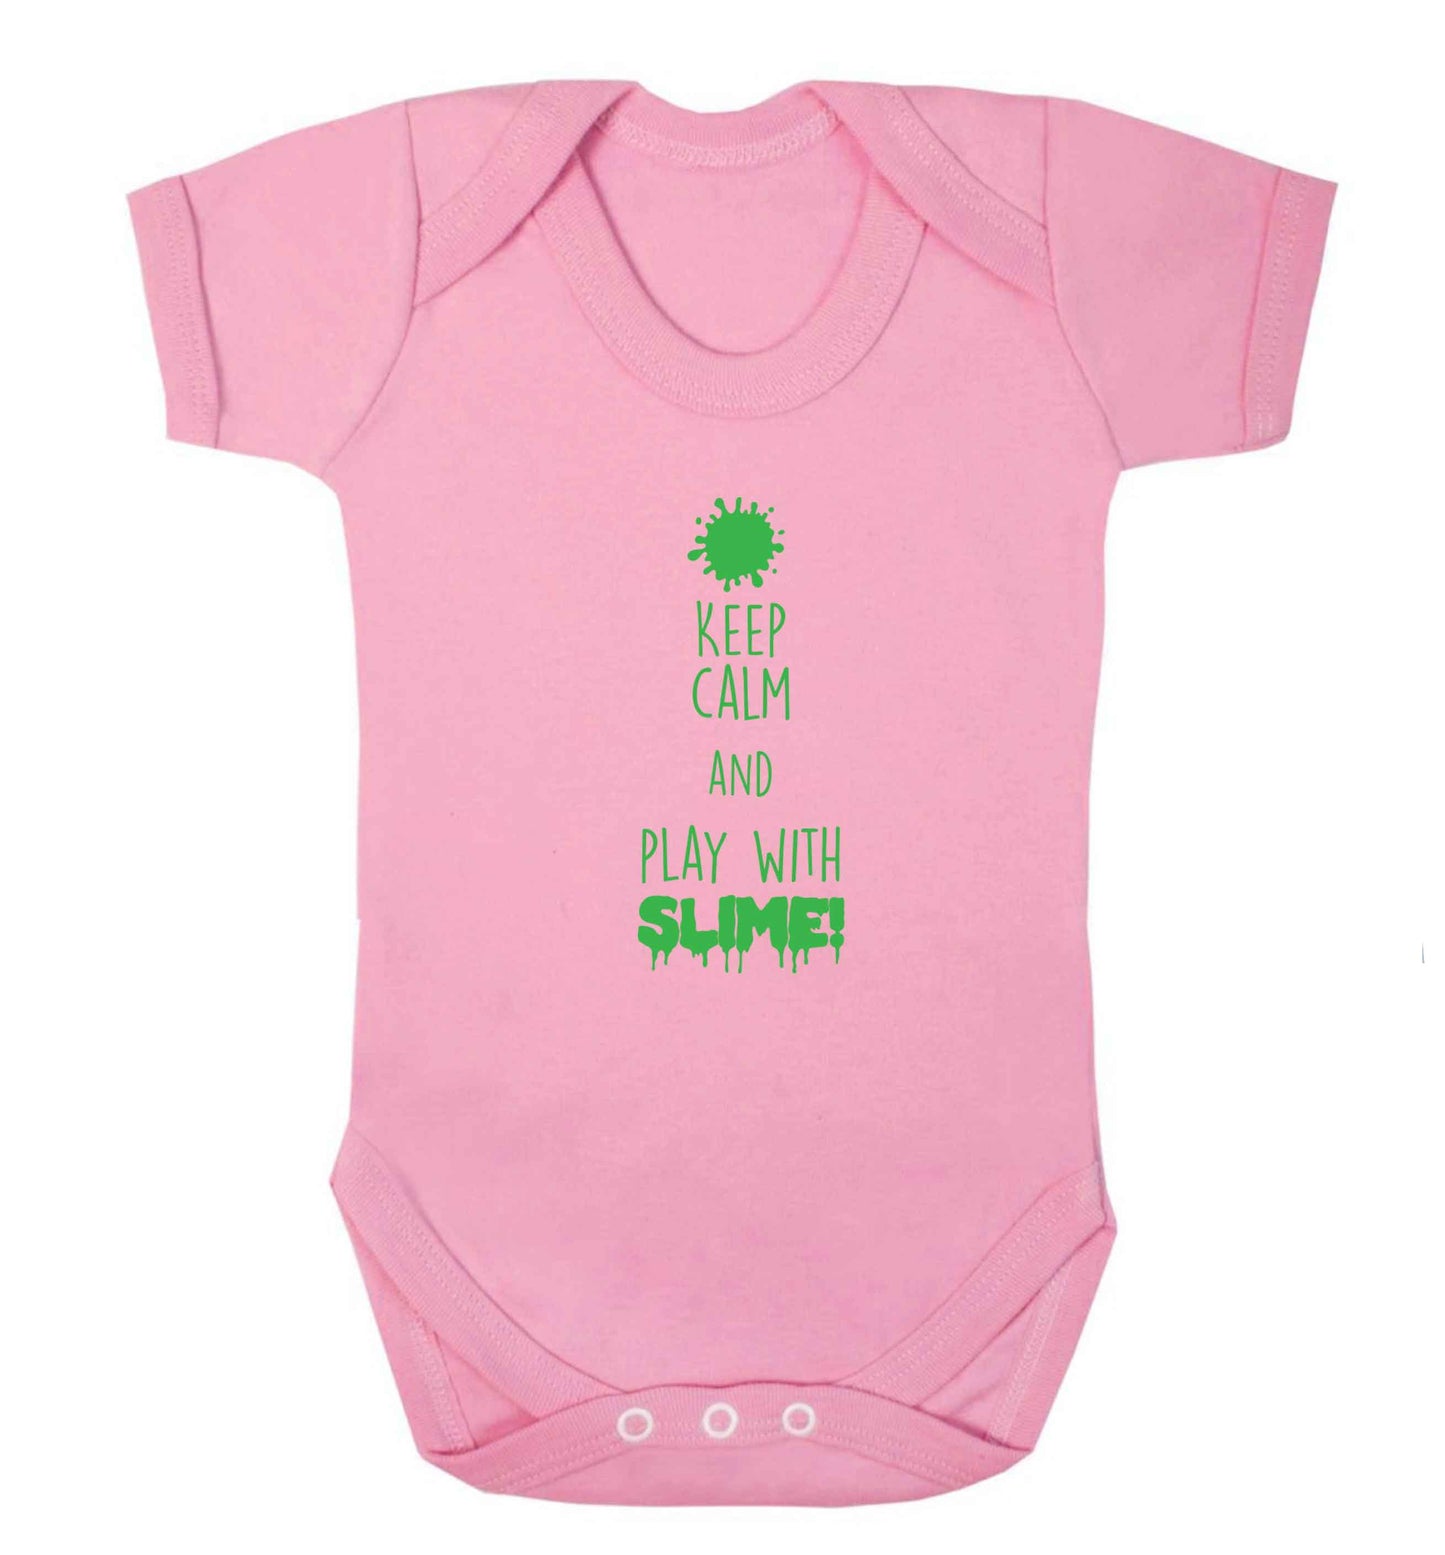 Neon green keep calm and play with slime!baby vest pale pink 18-24 months